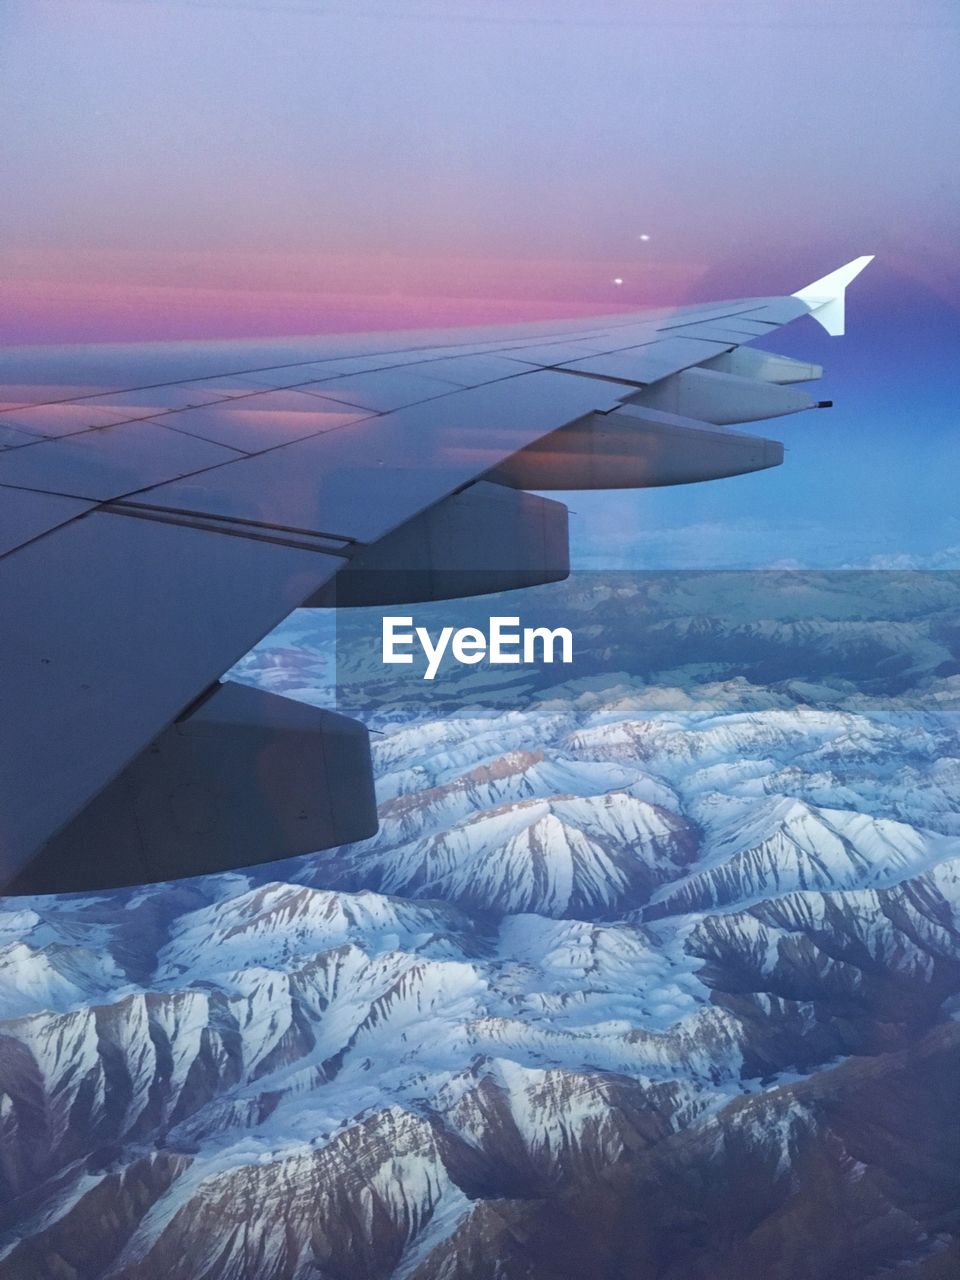 Cropped image of airplane flying over snow covered mountains against sky during sunset